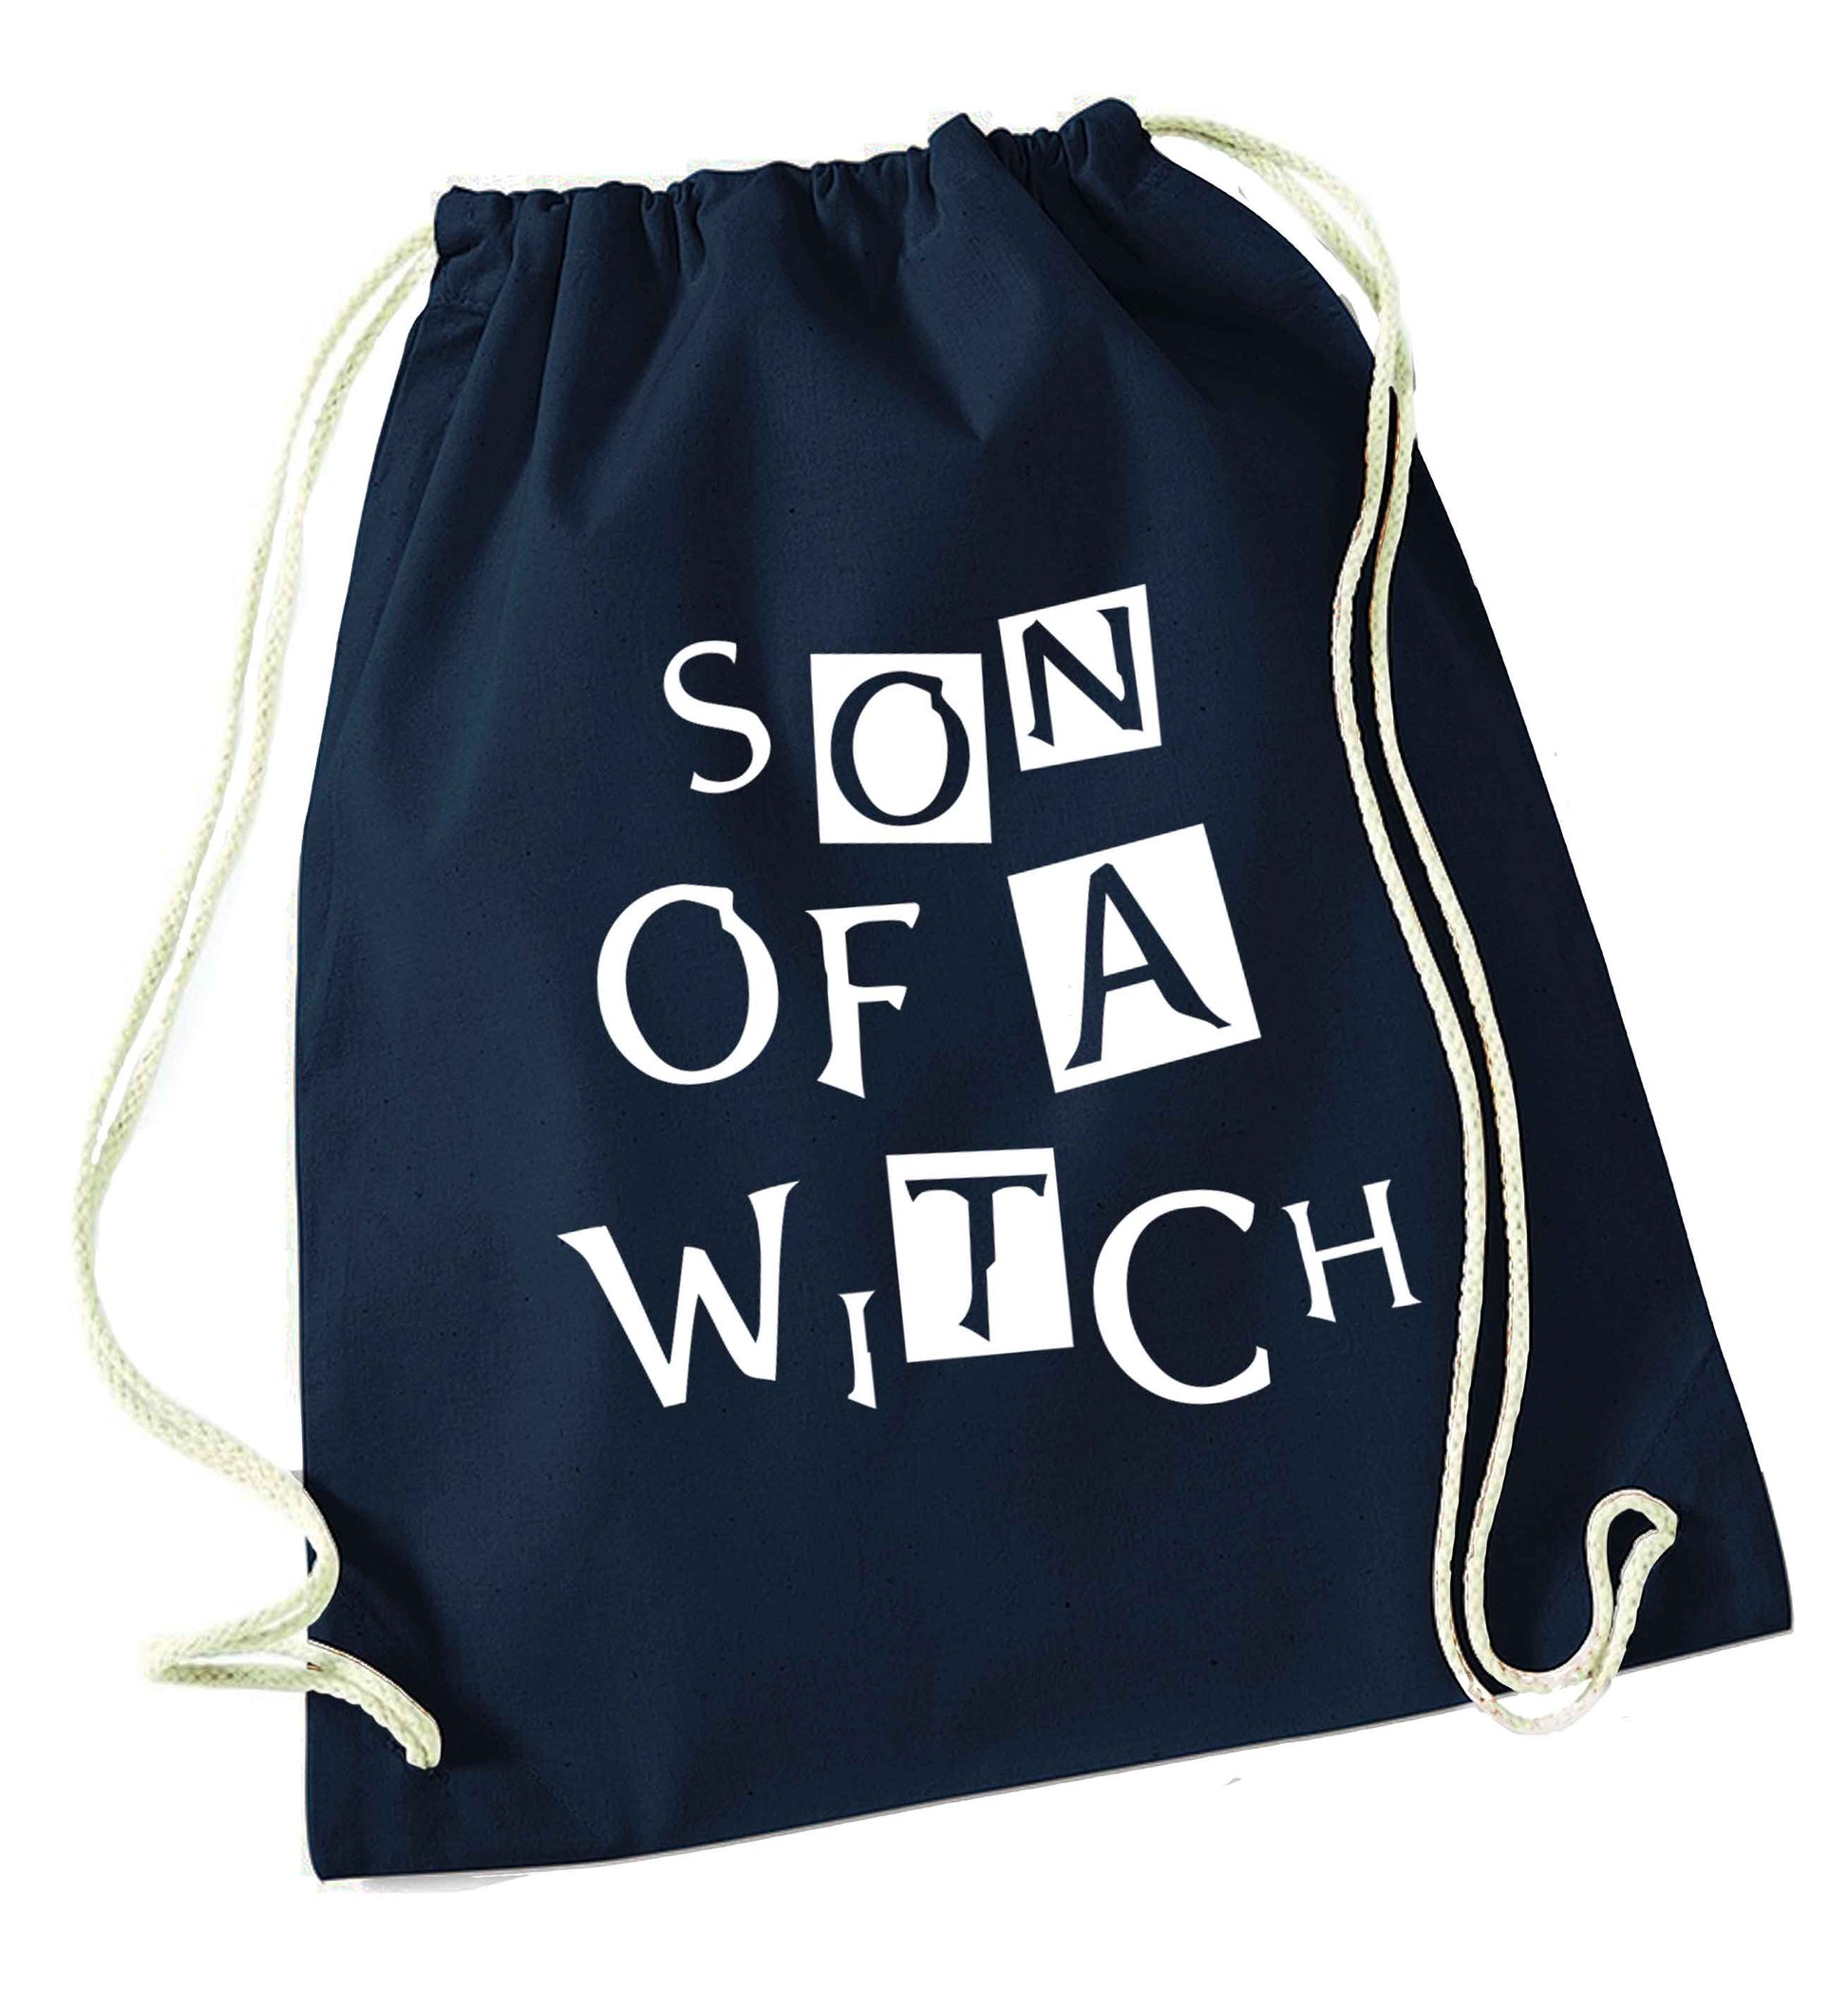 Son of a witch navy drawstring bag